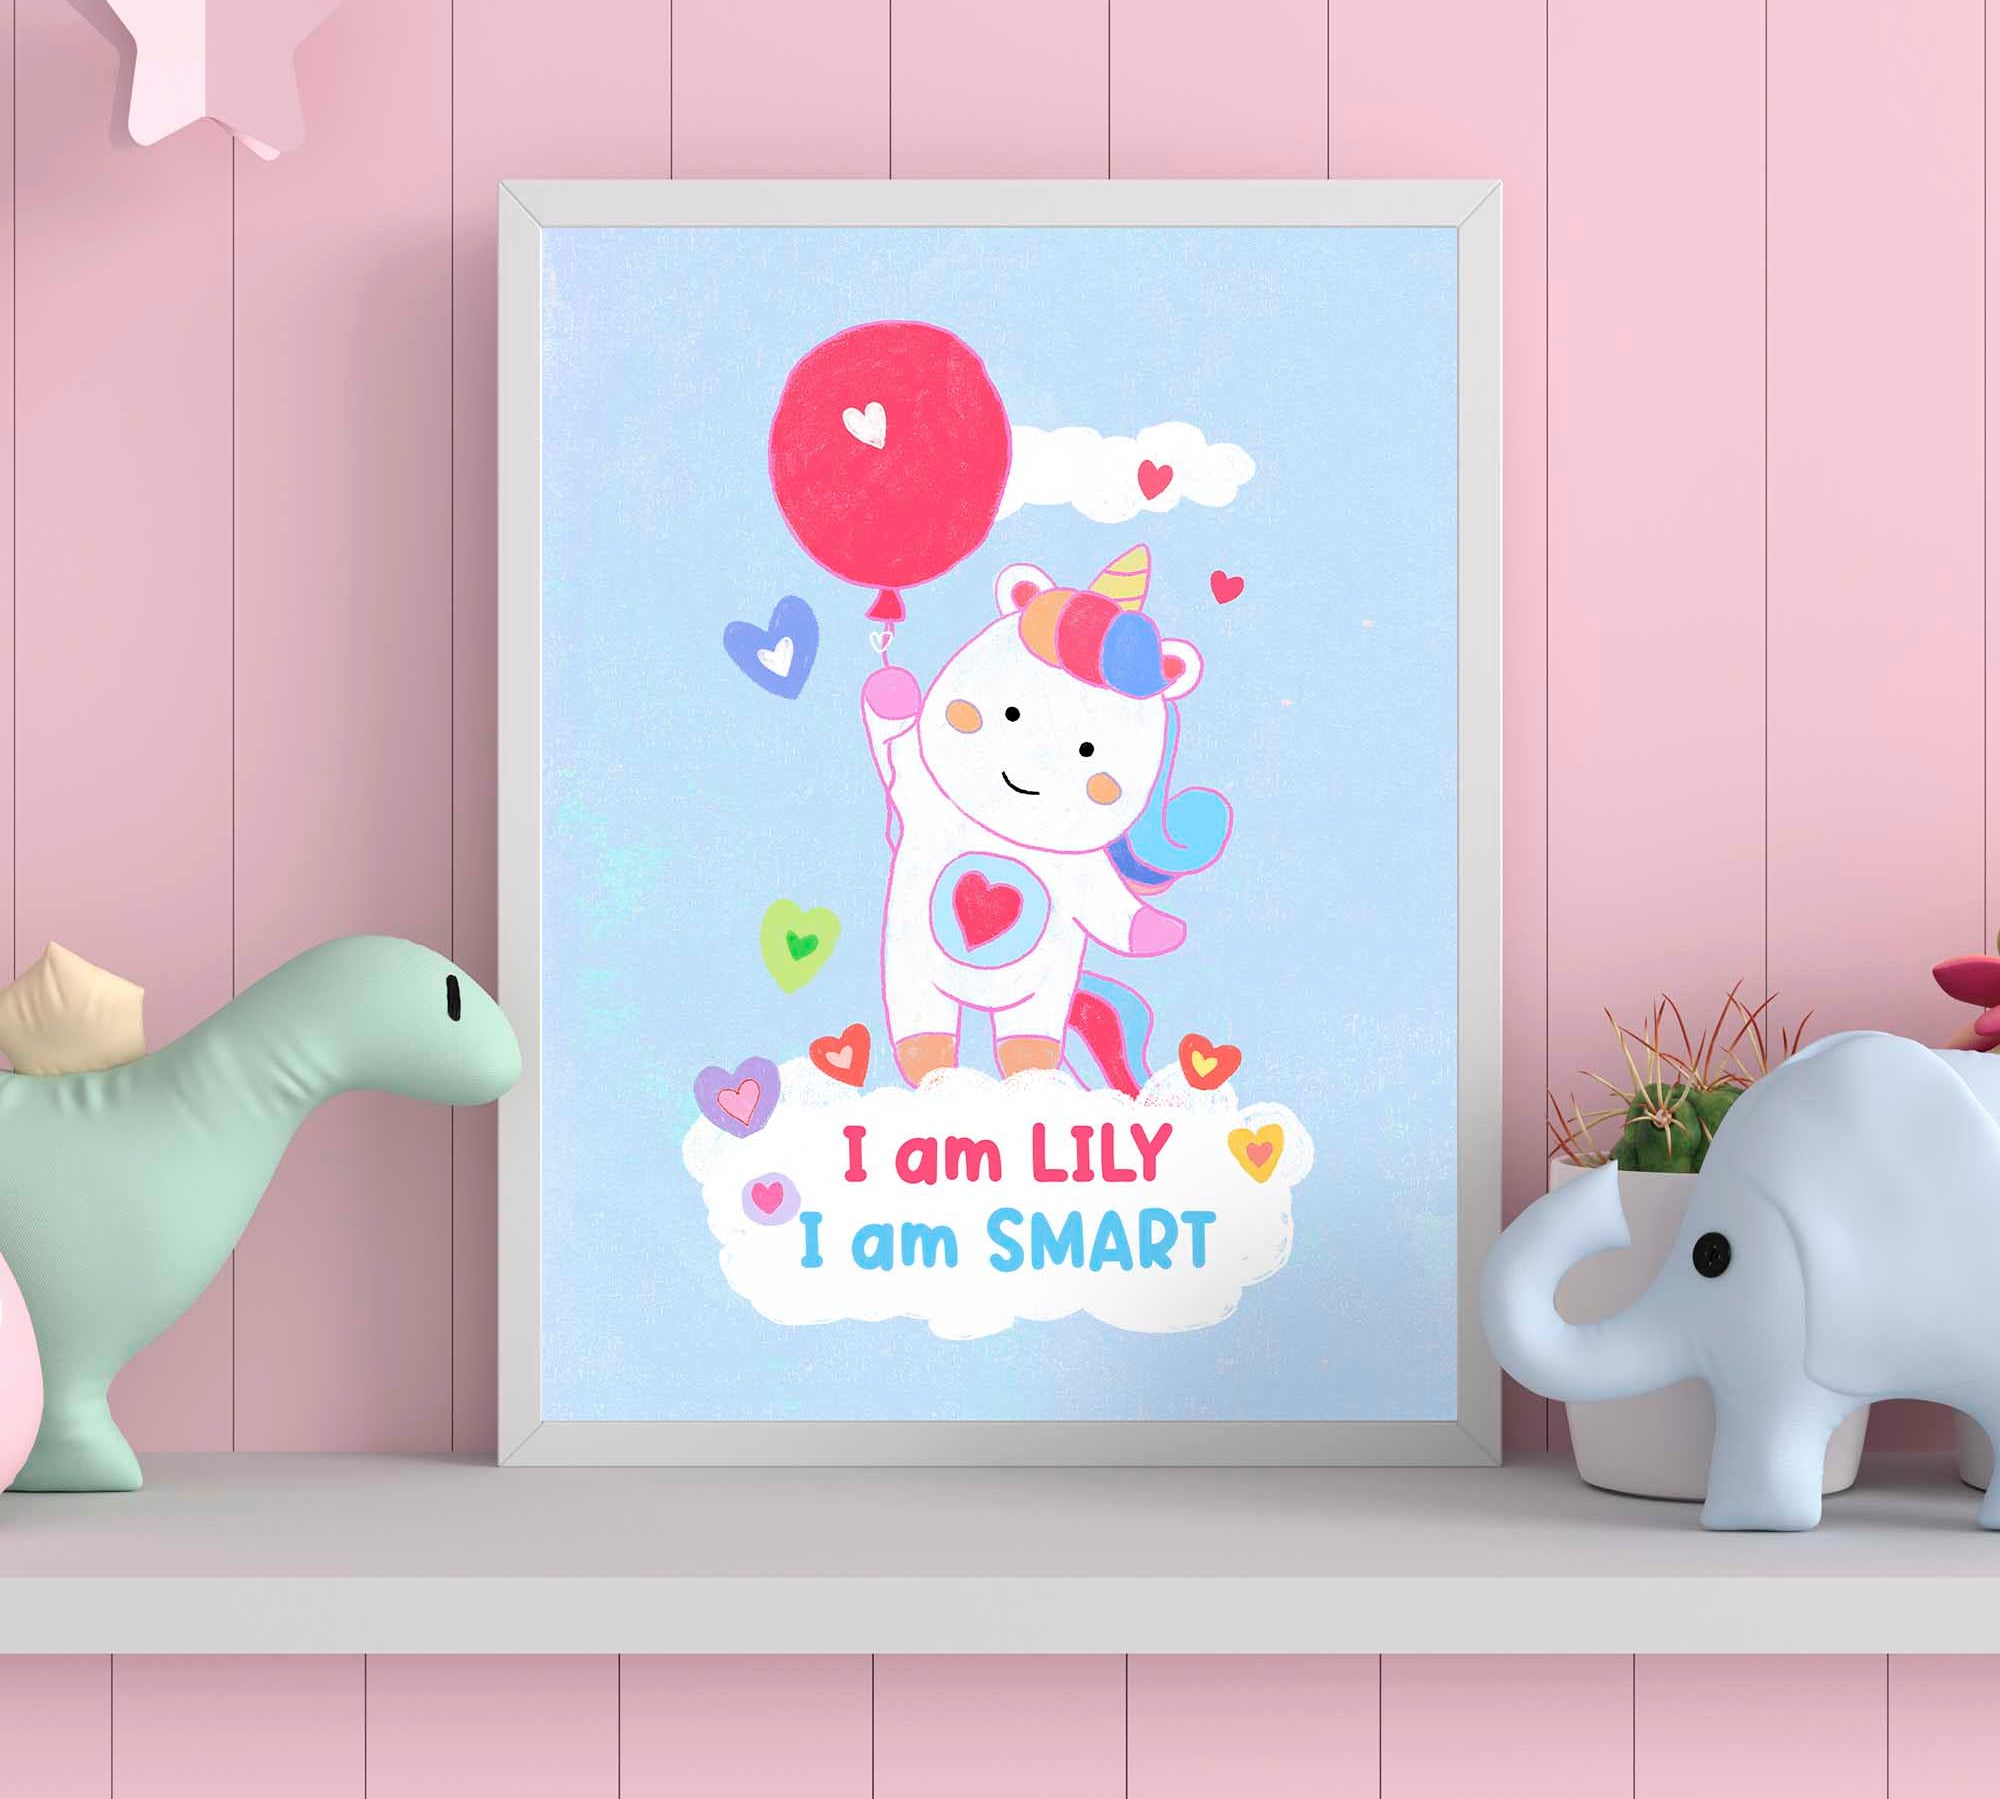 Cute unicorn framed poster with affirmations, fostering positivity in a girl's nursery.